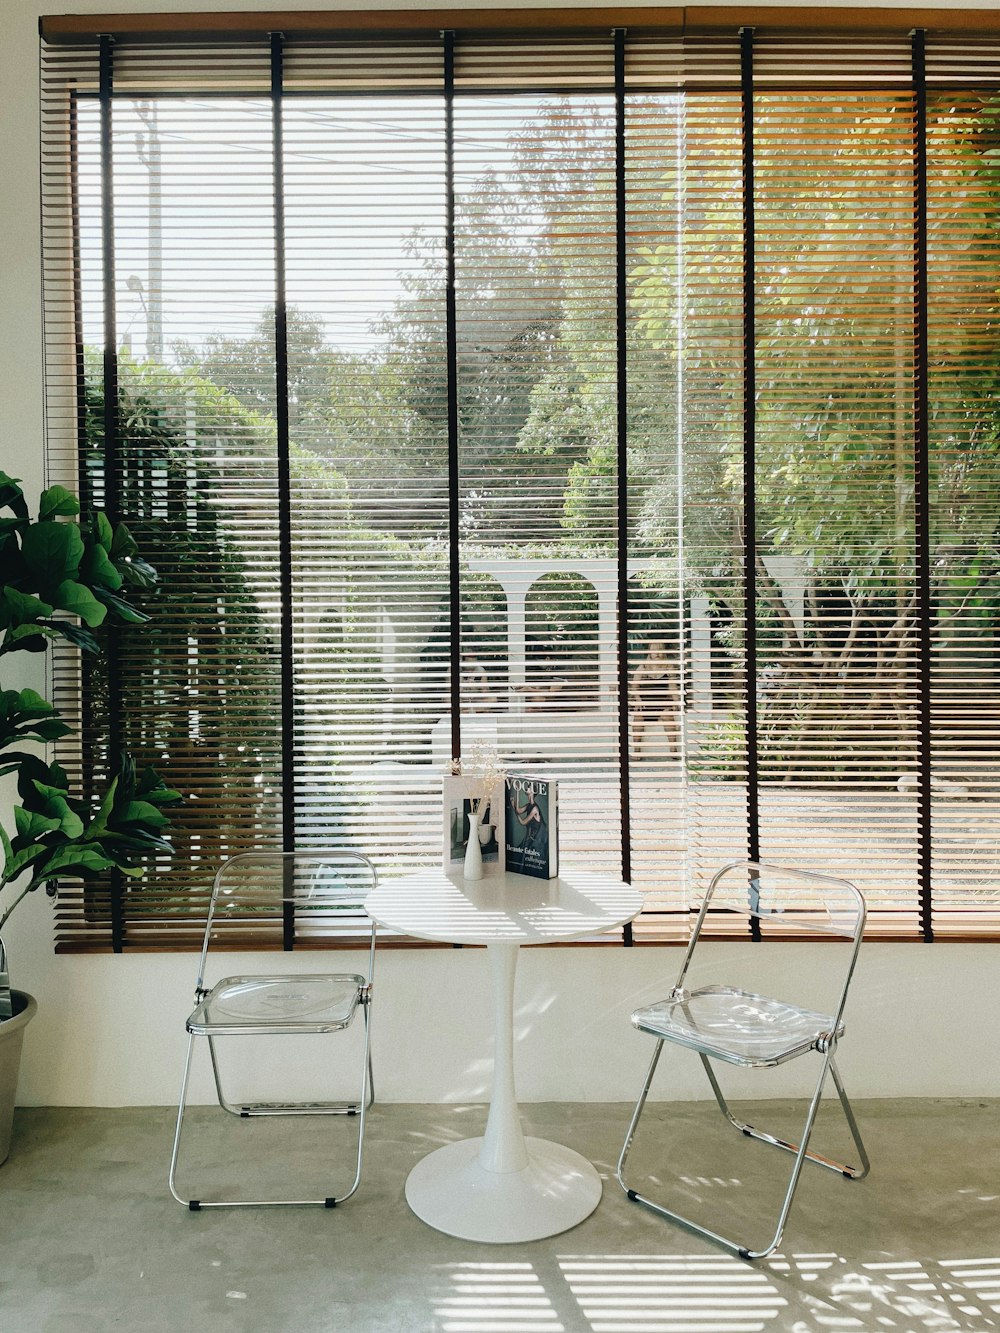 two chairs and a table in front of a window